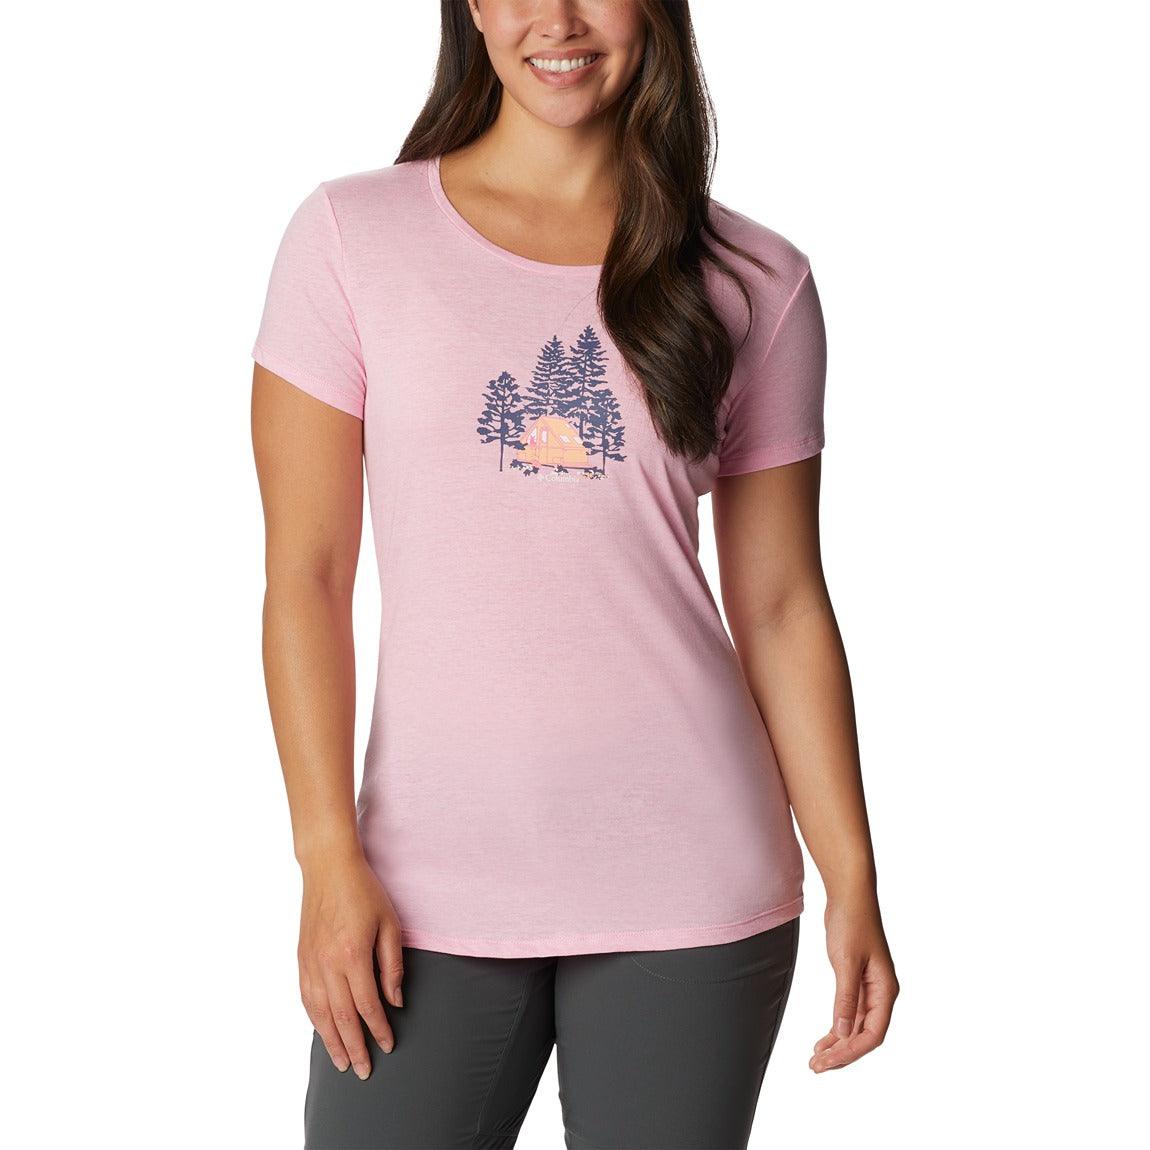 Daisy Days™ Short Sleeve Graphic Tee - Women - Sports Excellence